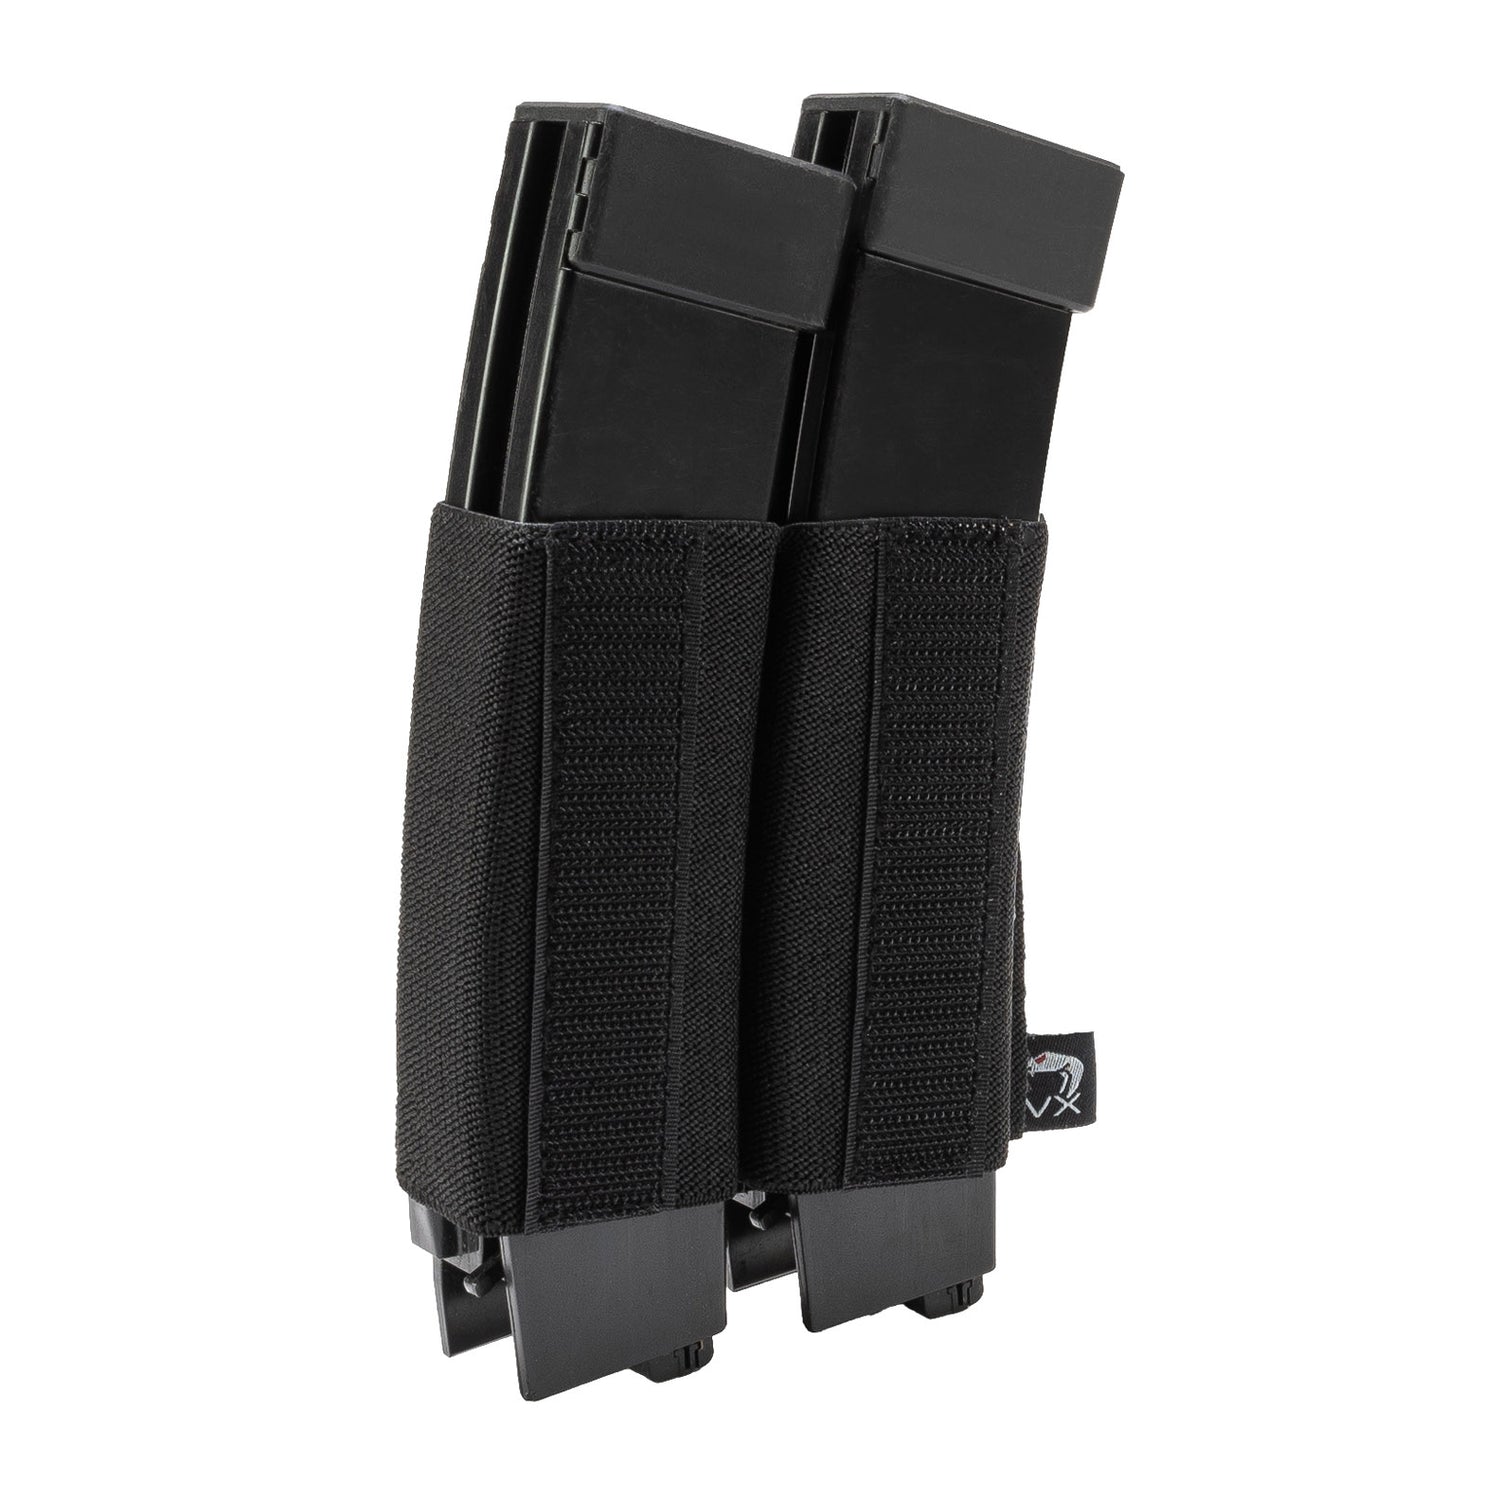 Viper-VX-Double-SMG-Mag-Sleeve